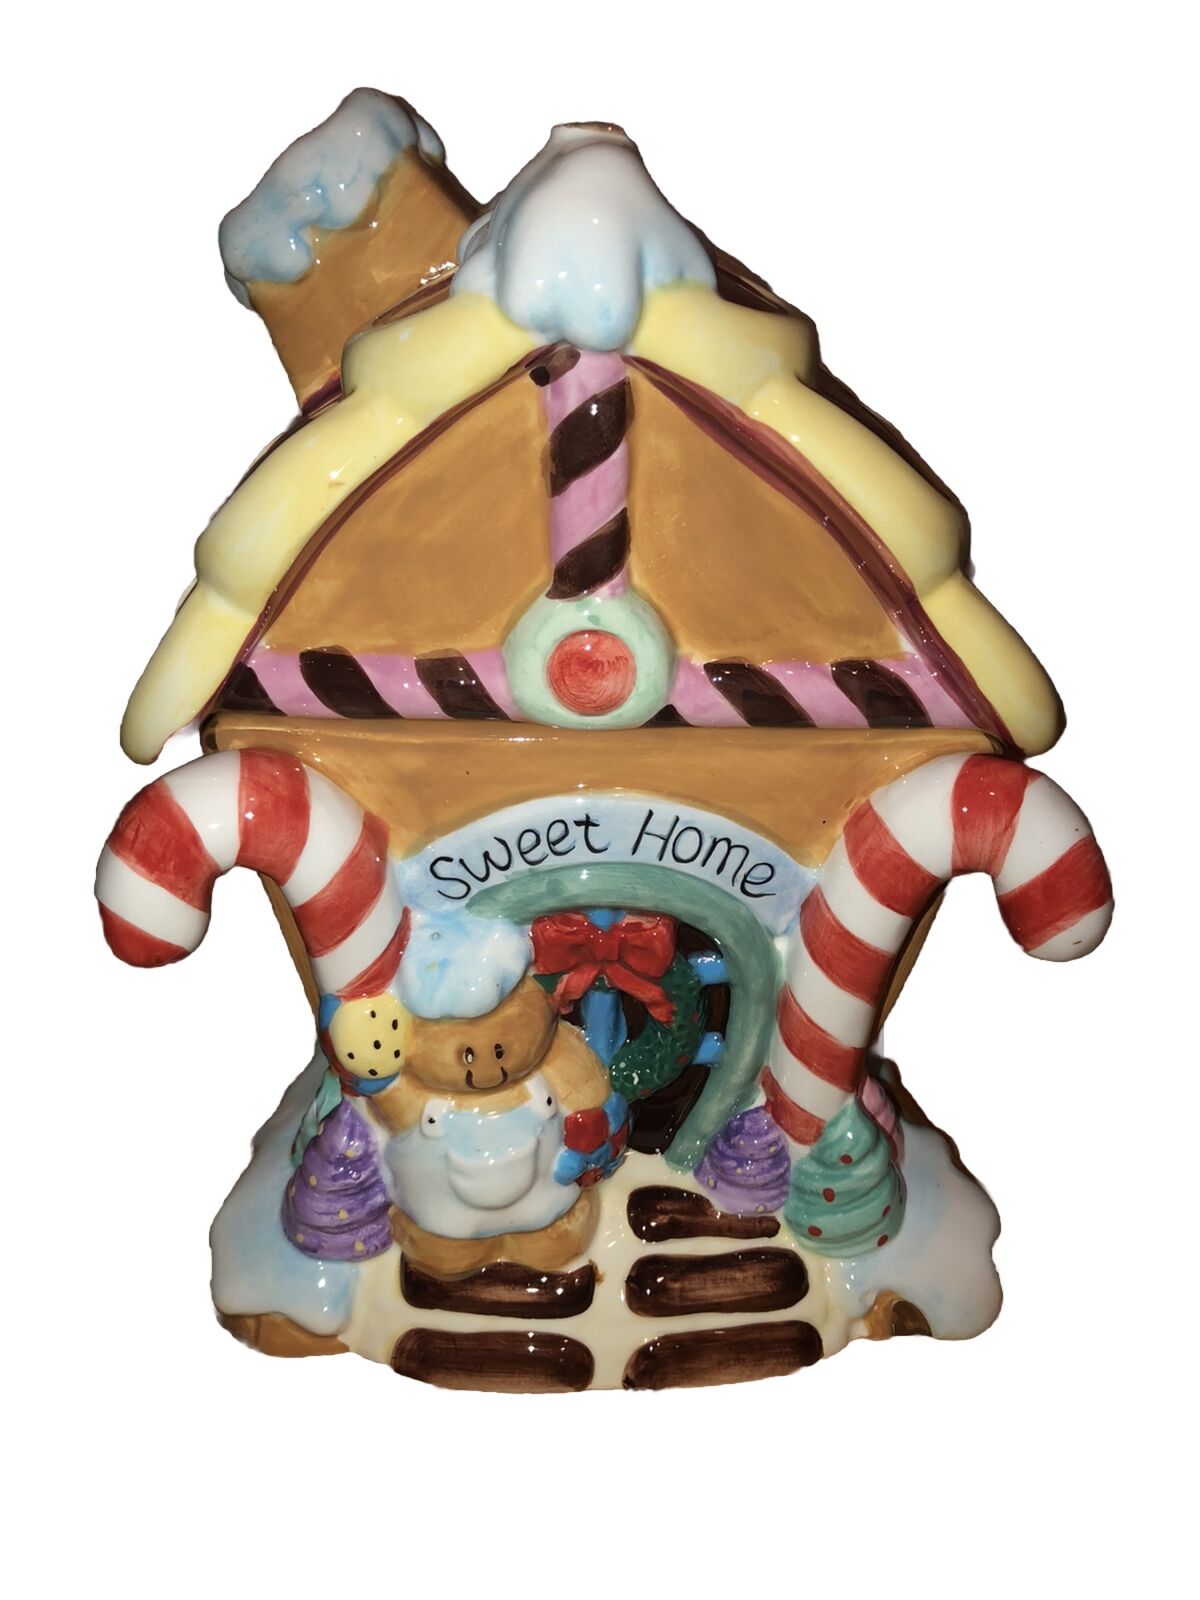 Adorable Ceramic Christmas Gingerbread House And Man Cookie Jar ￼